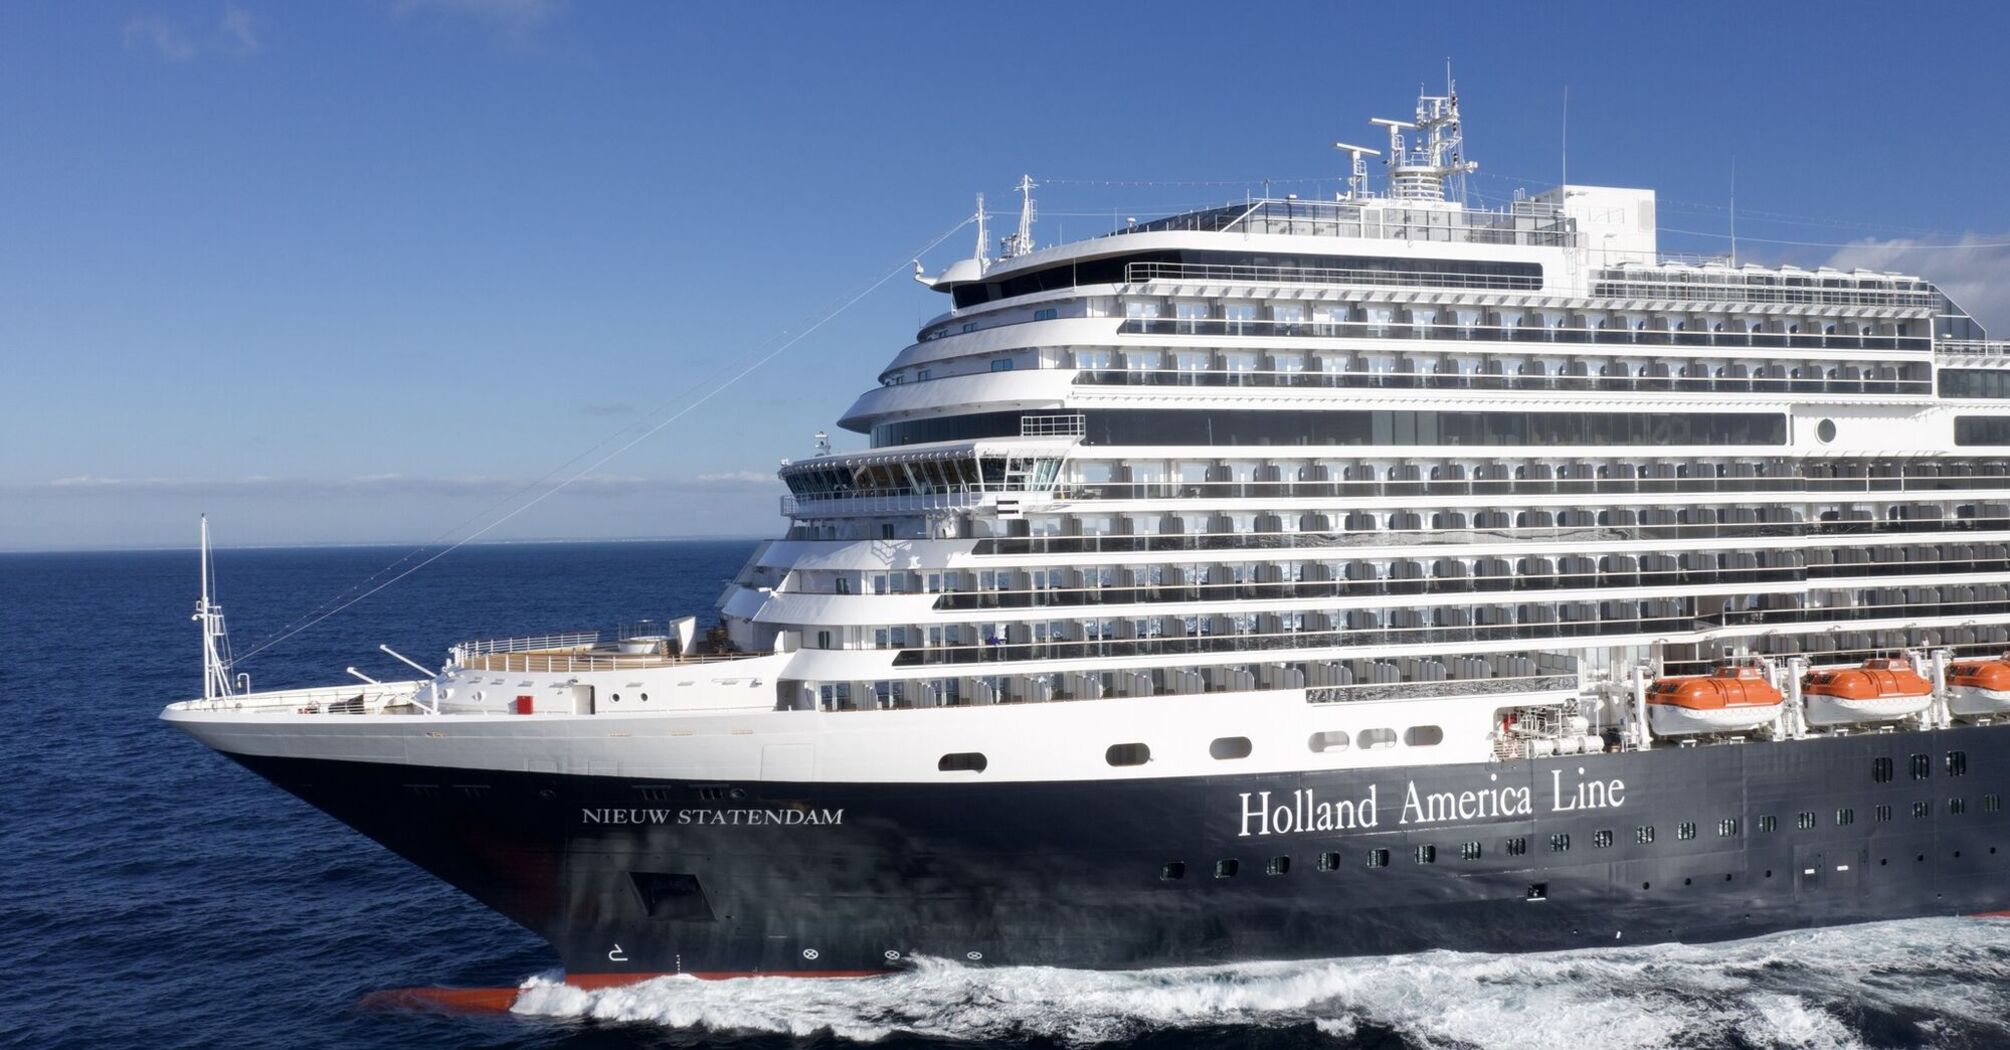 Travelling across seven continents: Holland America Line to go around the world in 2026